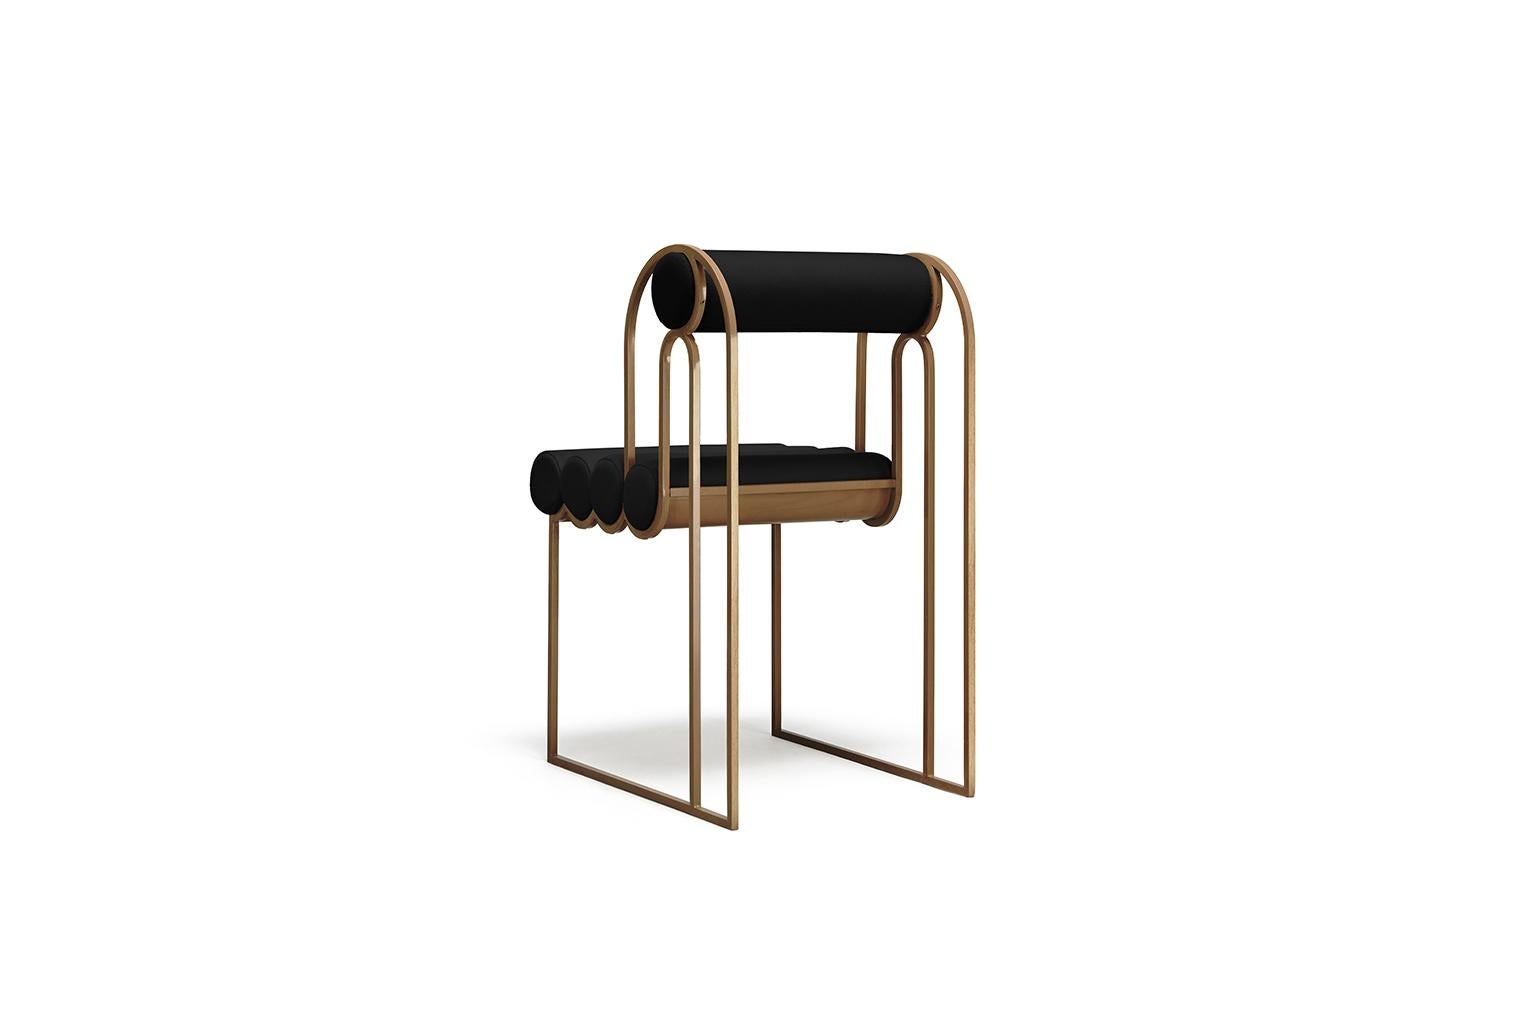 Apollo dining chair - Black and bronze by Bohinc Studio. This chair creates a graceful appearance in a flowing mix of brass and black fabric. The metal loops continue with the wavy seat which is made with wool. The brass loops are configured to